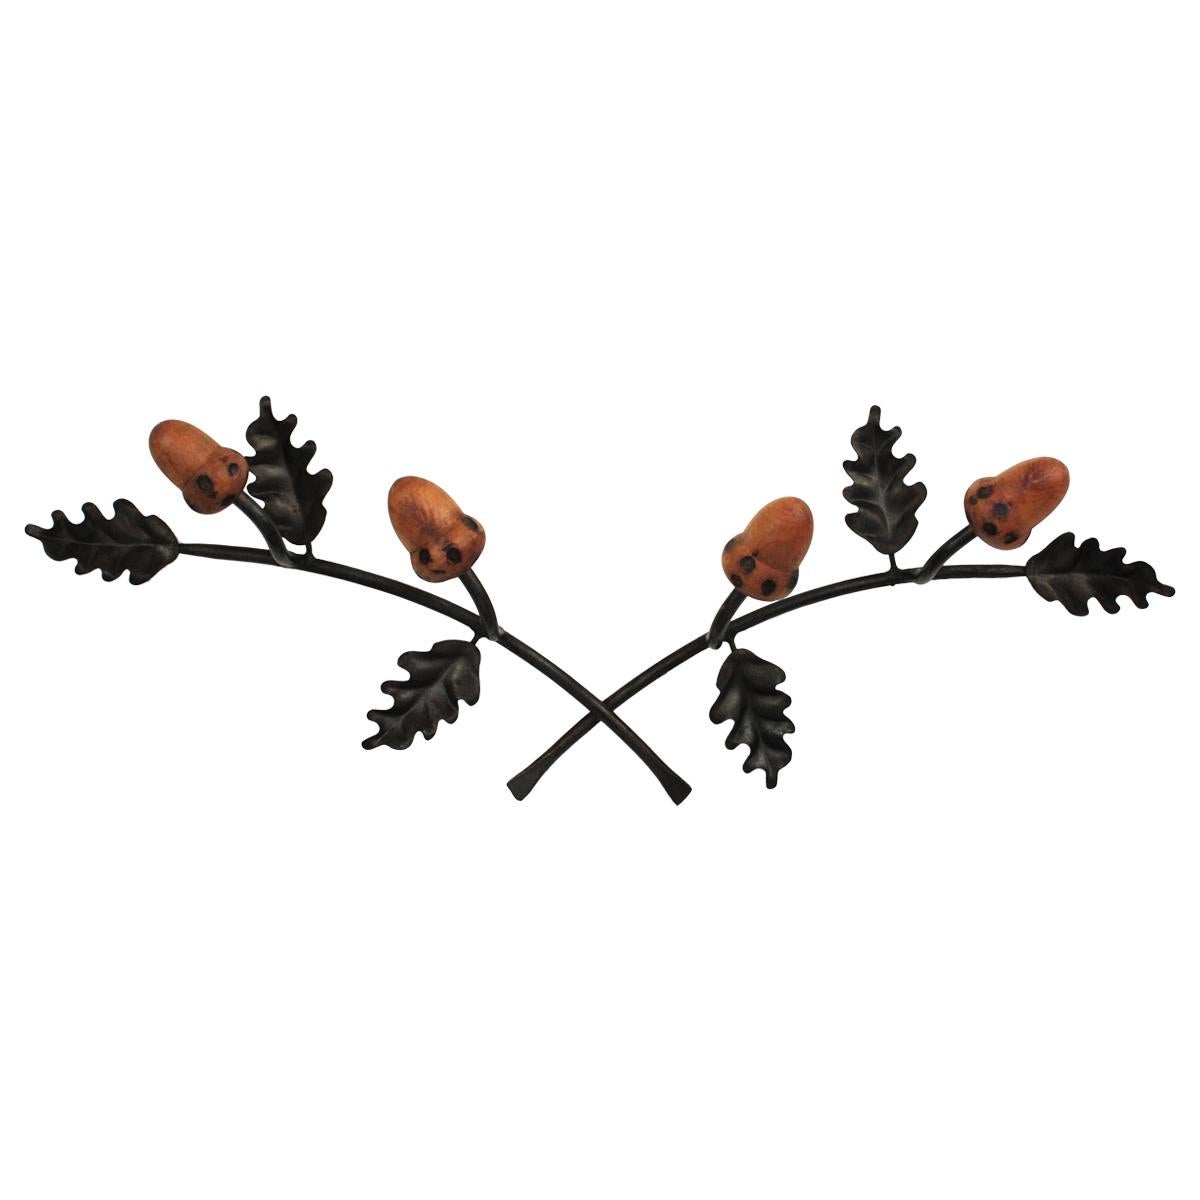 Iron and Wood Wall Coat Rack, Spain, 1960s
Eye-catching rustic style hats an coats rack with oak leaves iron backplate and wood acorn hangers.
This wall coat rack features two branches of oak tree in iron with 2 carved wood hangers each.
This piece